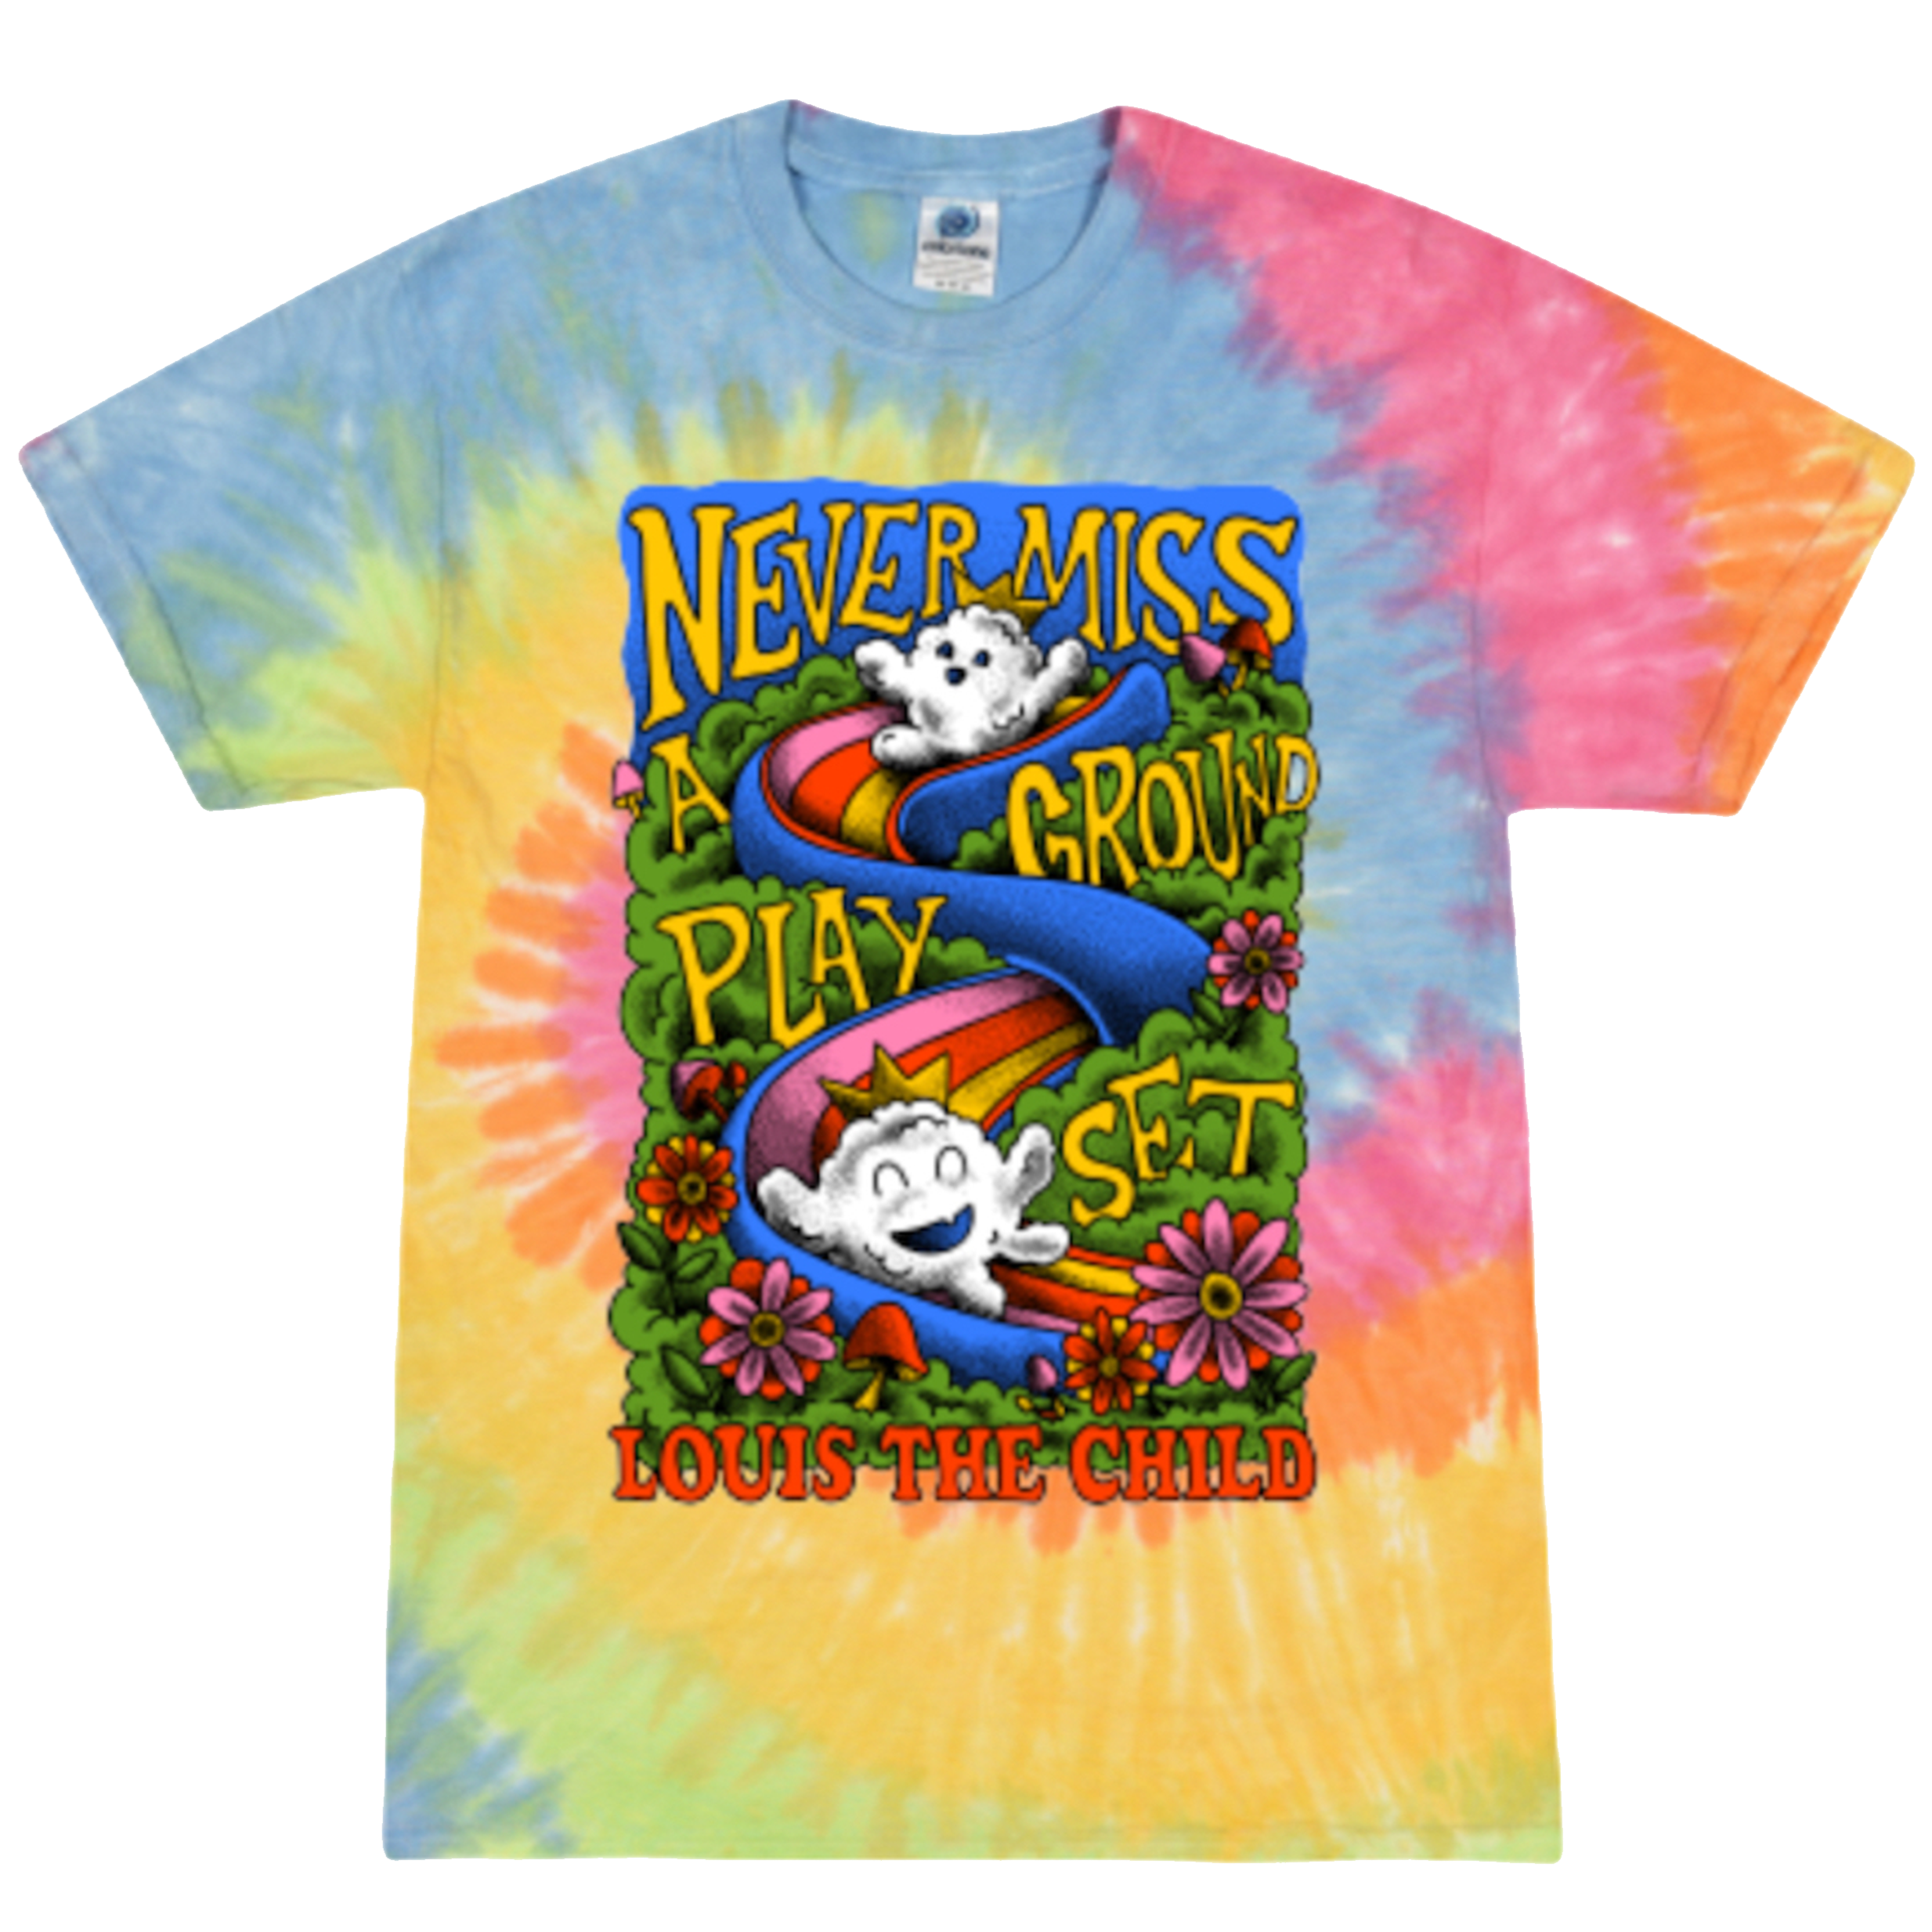 Never Miss A Play Ground Set - Tie Dye Tee